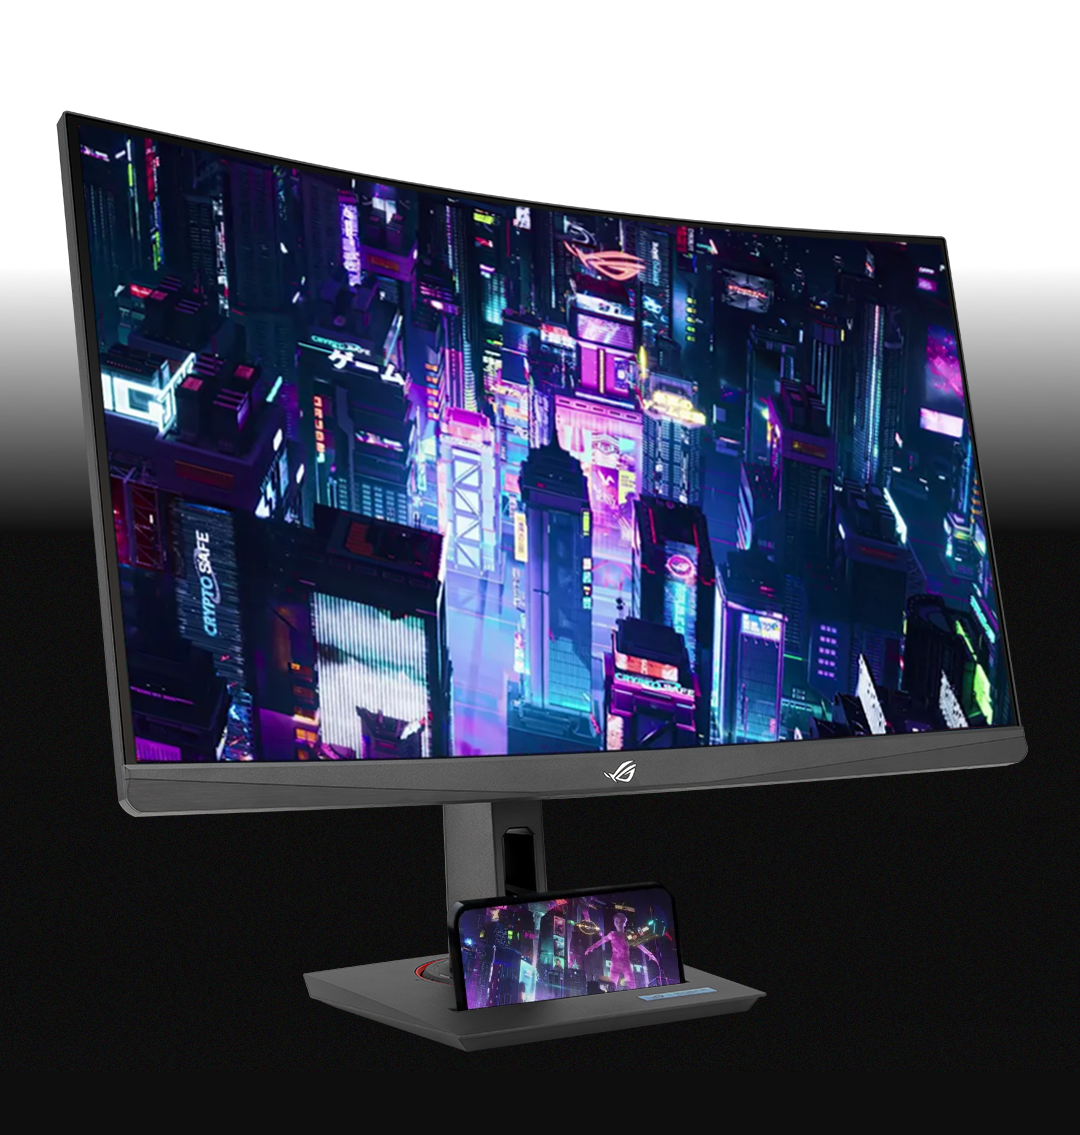 This monitor boasts a compact footprint, saving valuable desk space.